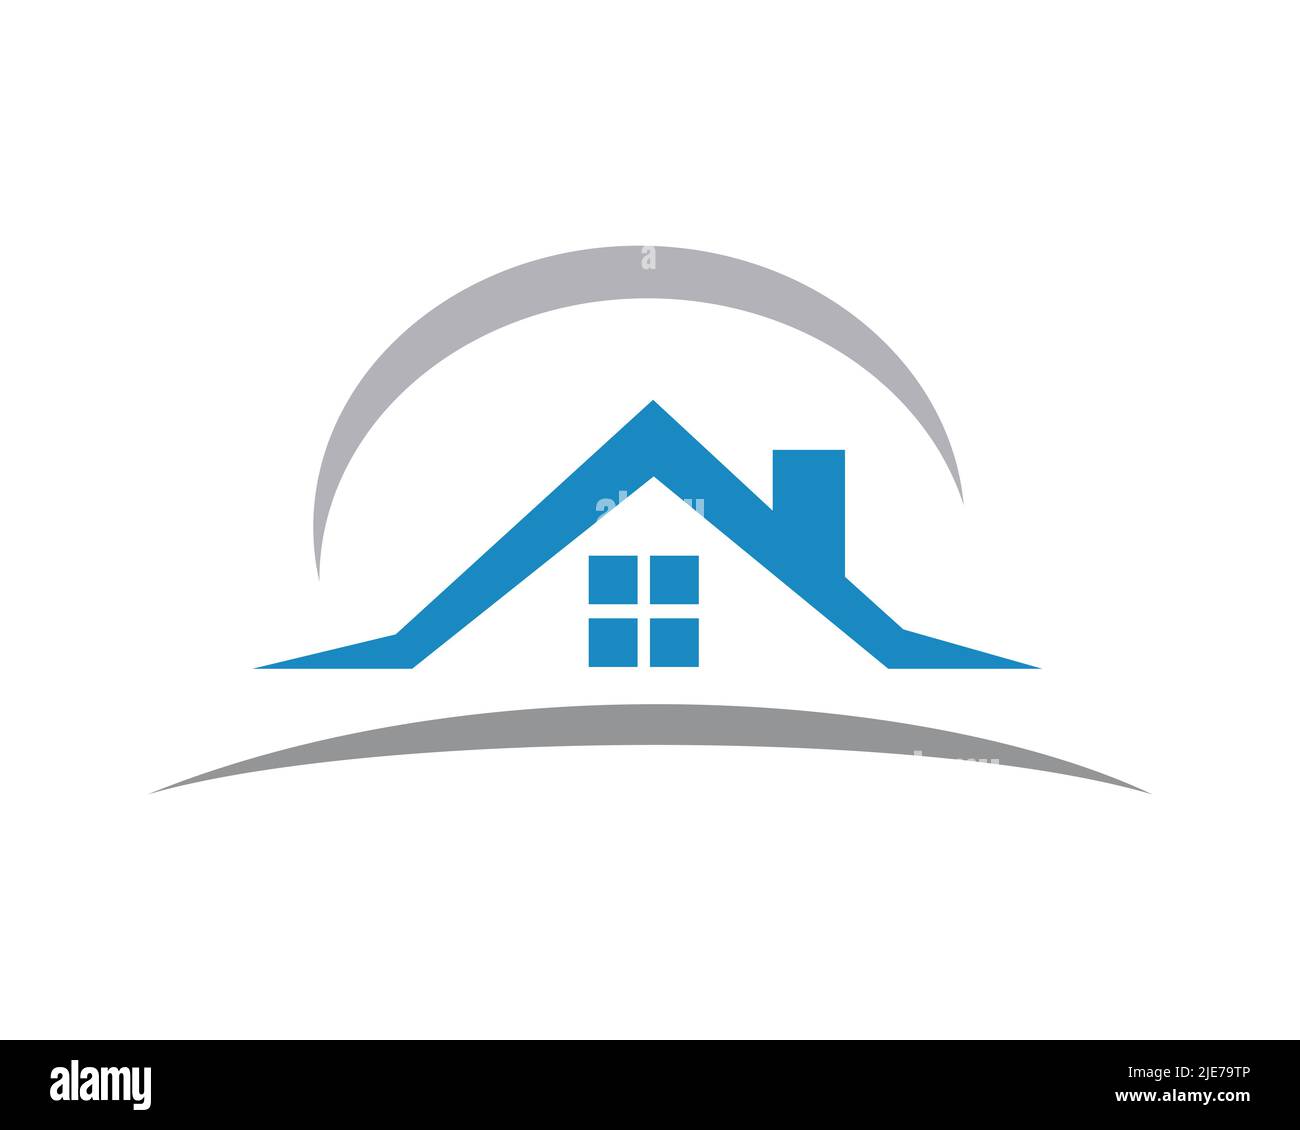 Home, Real Estate combined with Half Circle as Symbolization of Shield or Safety Stock Vector